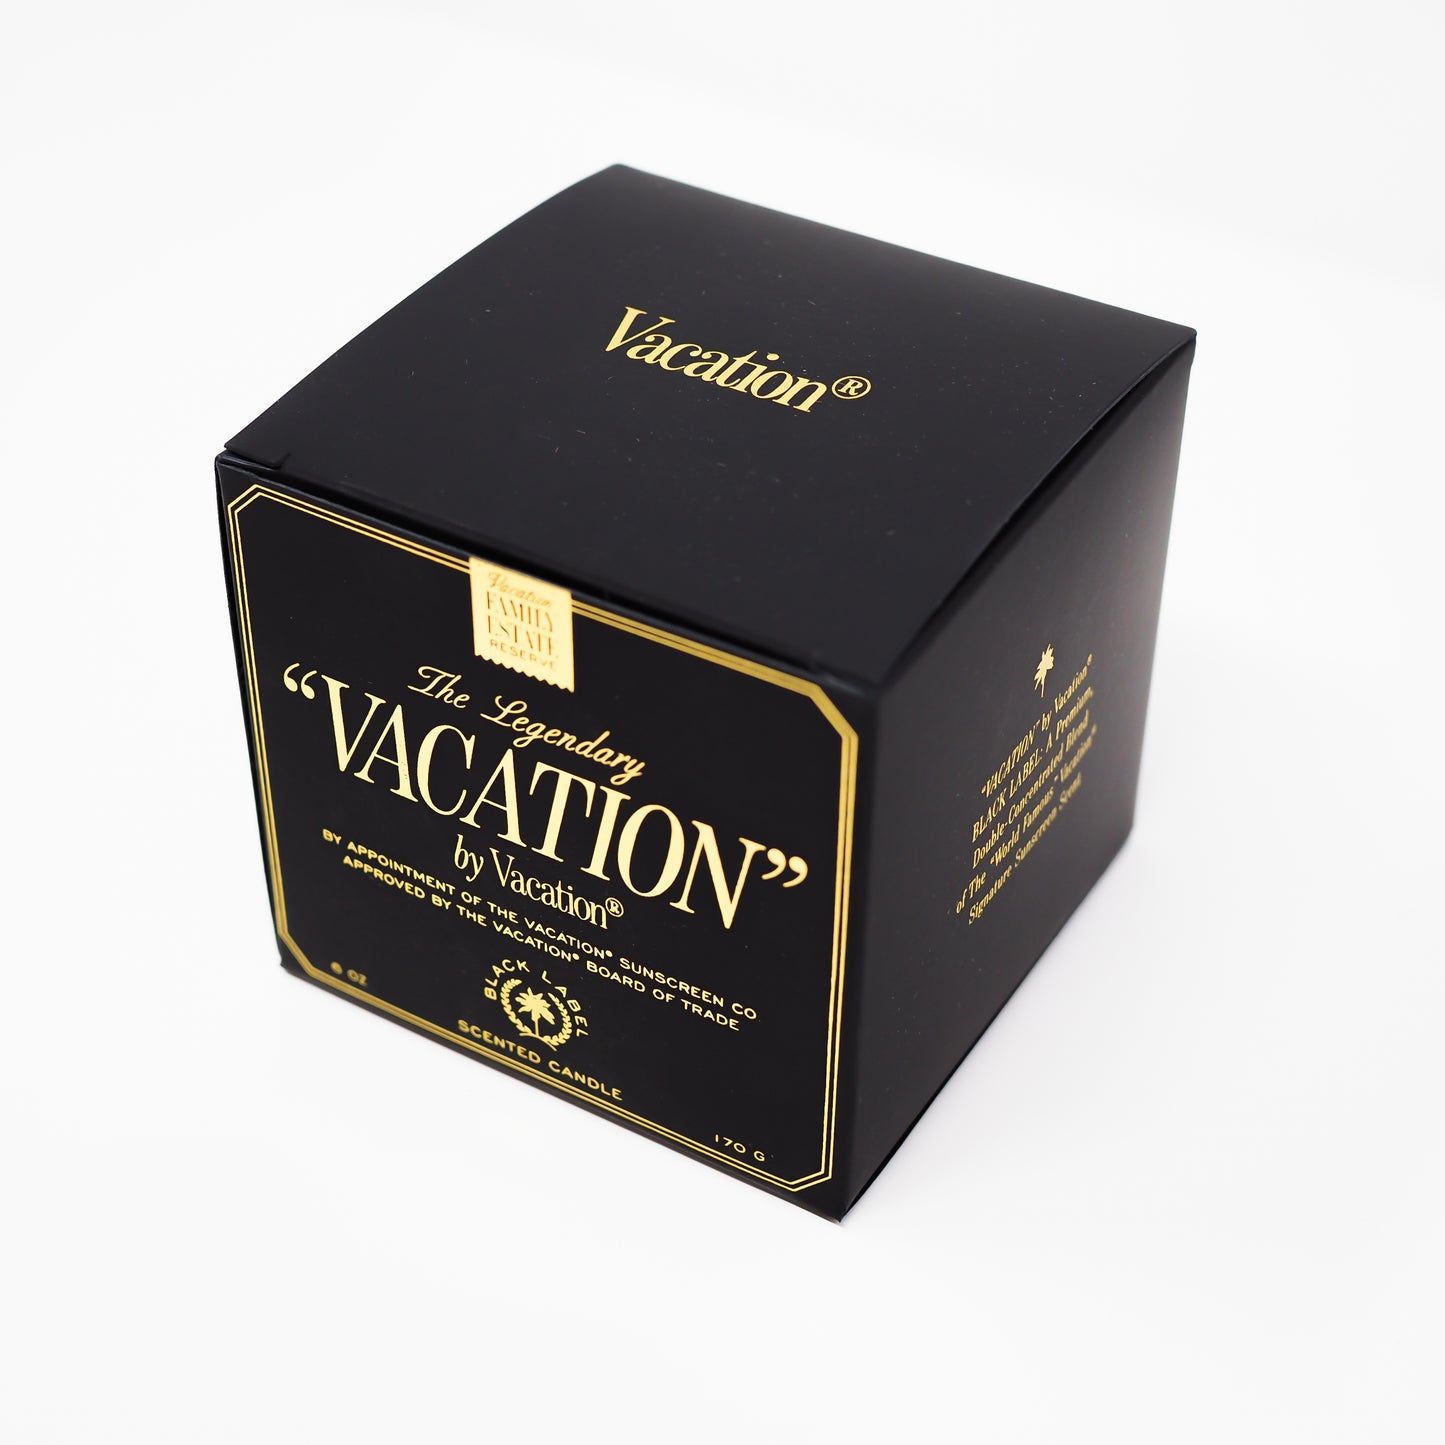 "Vacation" by Vacation